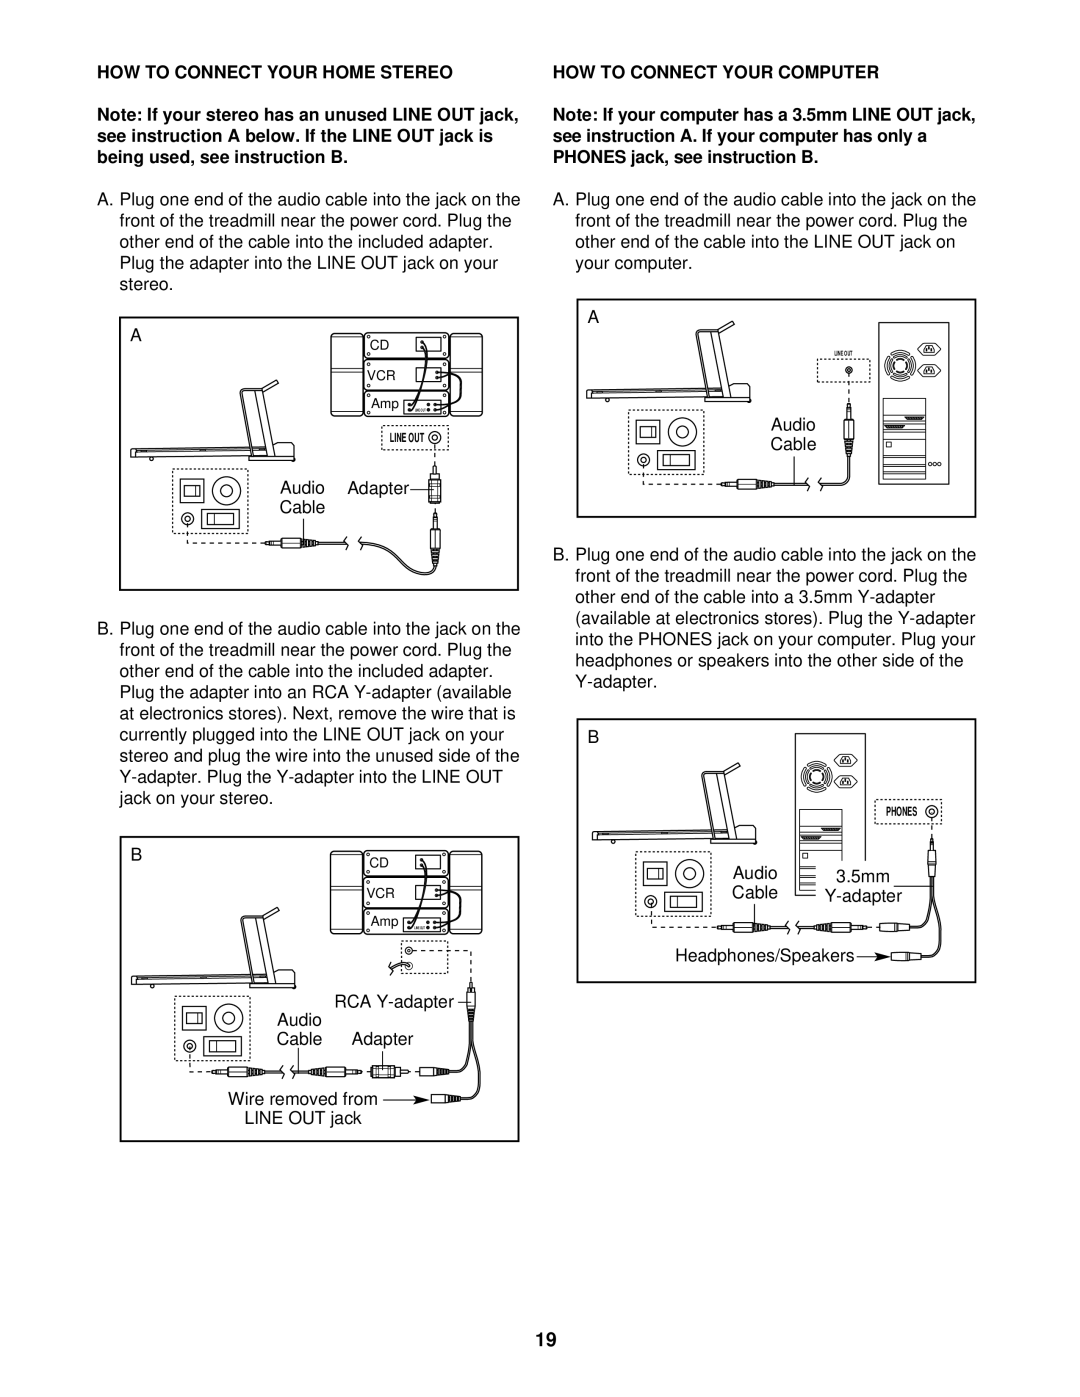 ProForm PFTL14920 user manual HOW to Connect Your Home Stereo, HOW to Connect Your Computer 